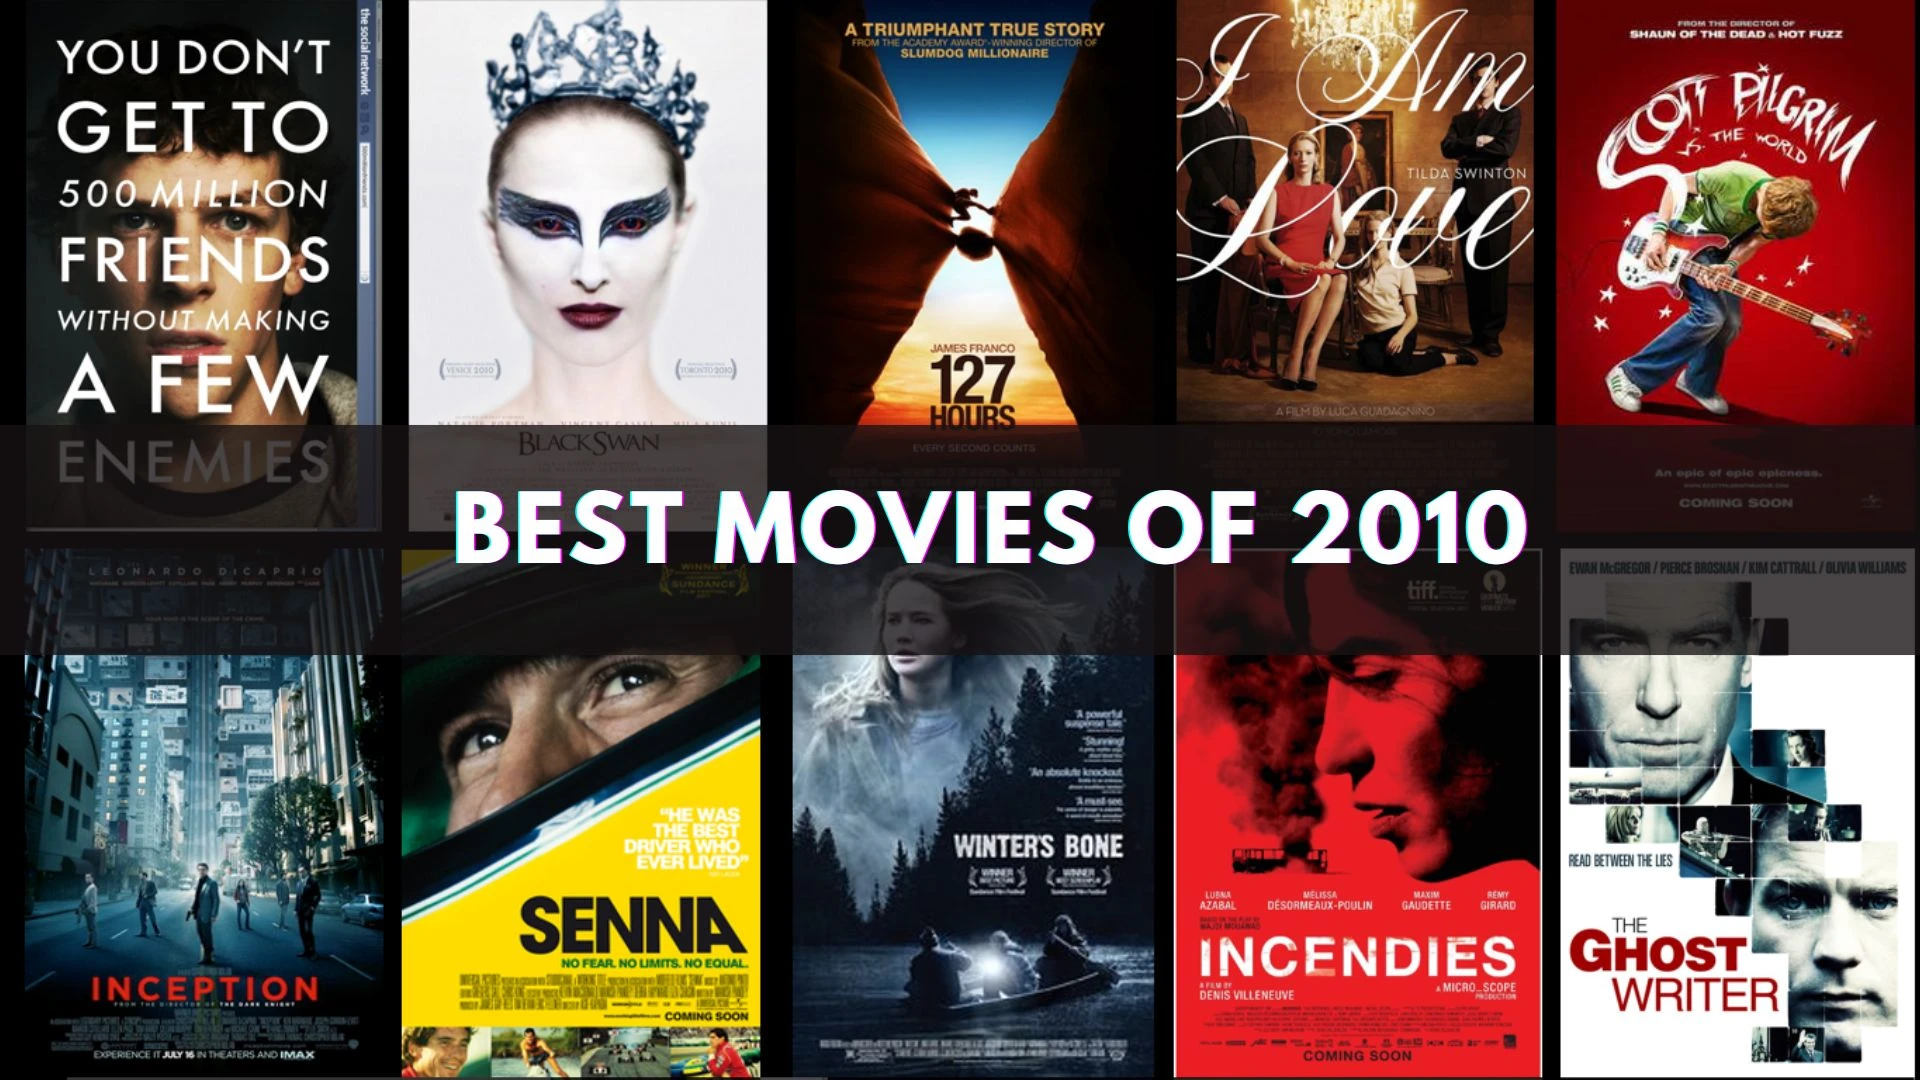 Best Movies of 2010